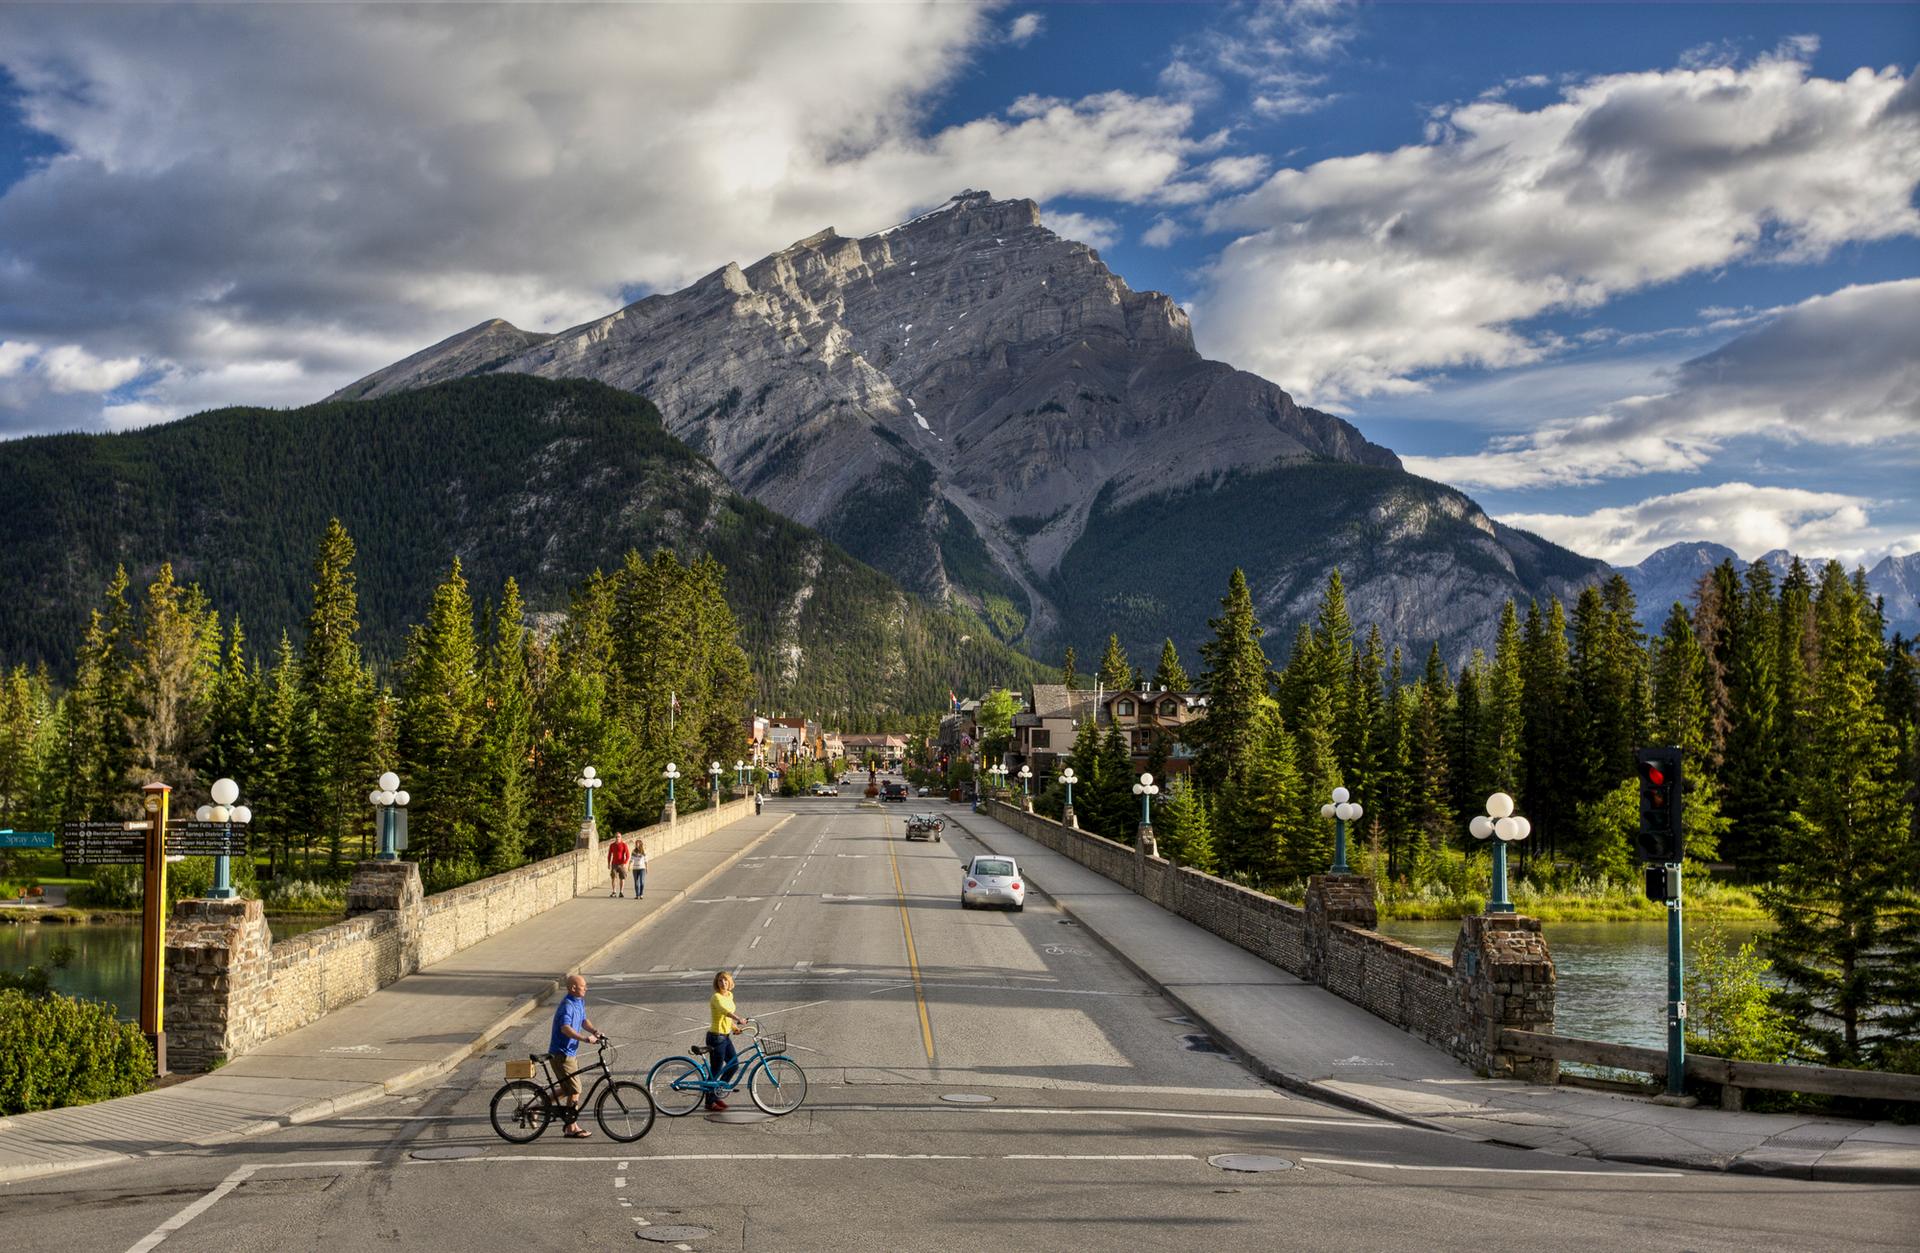 The Town of Banff